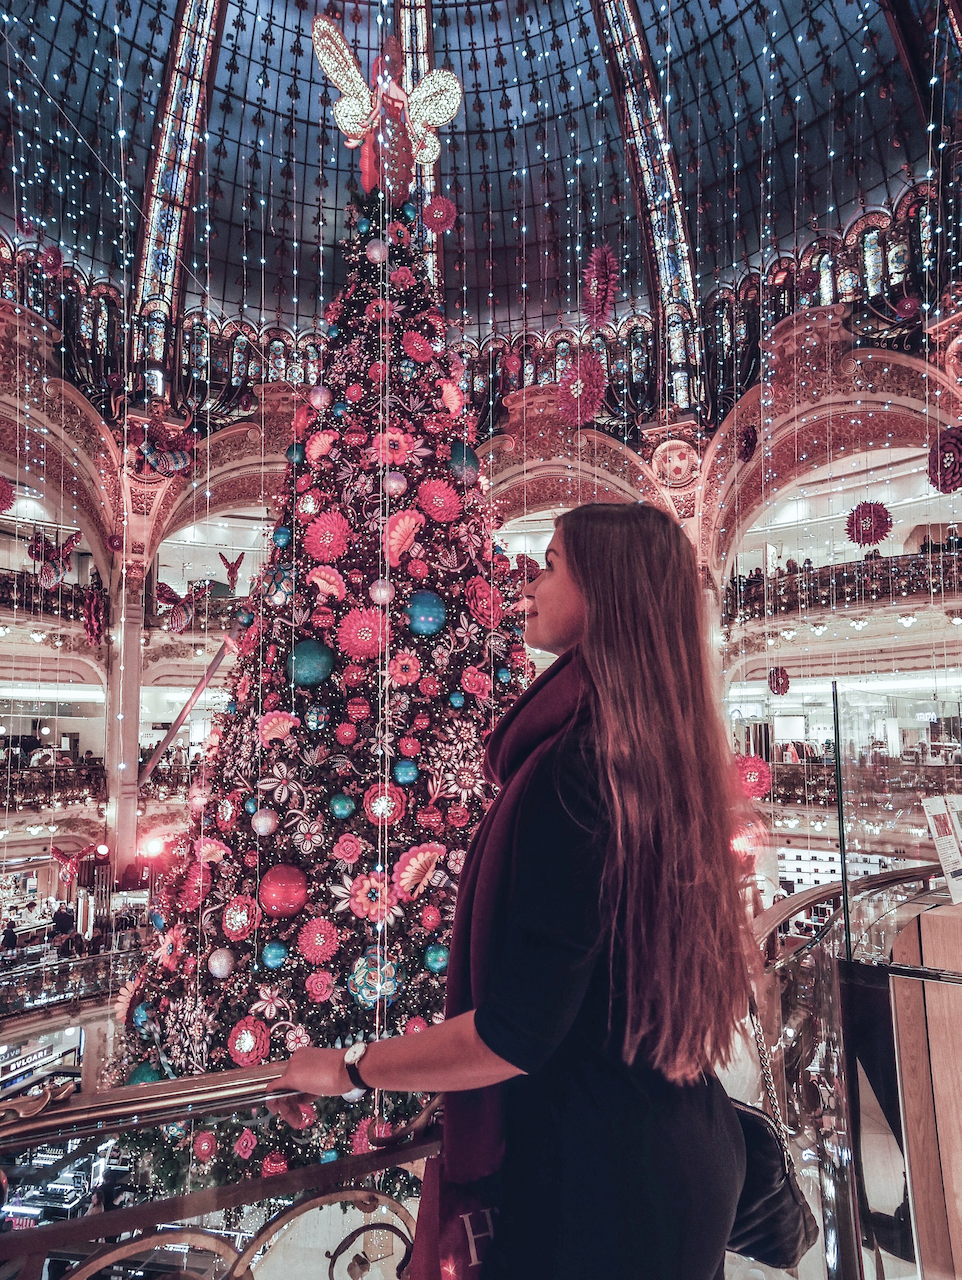 The Lafayette Christmas tree in 2019 - Paris - France